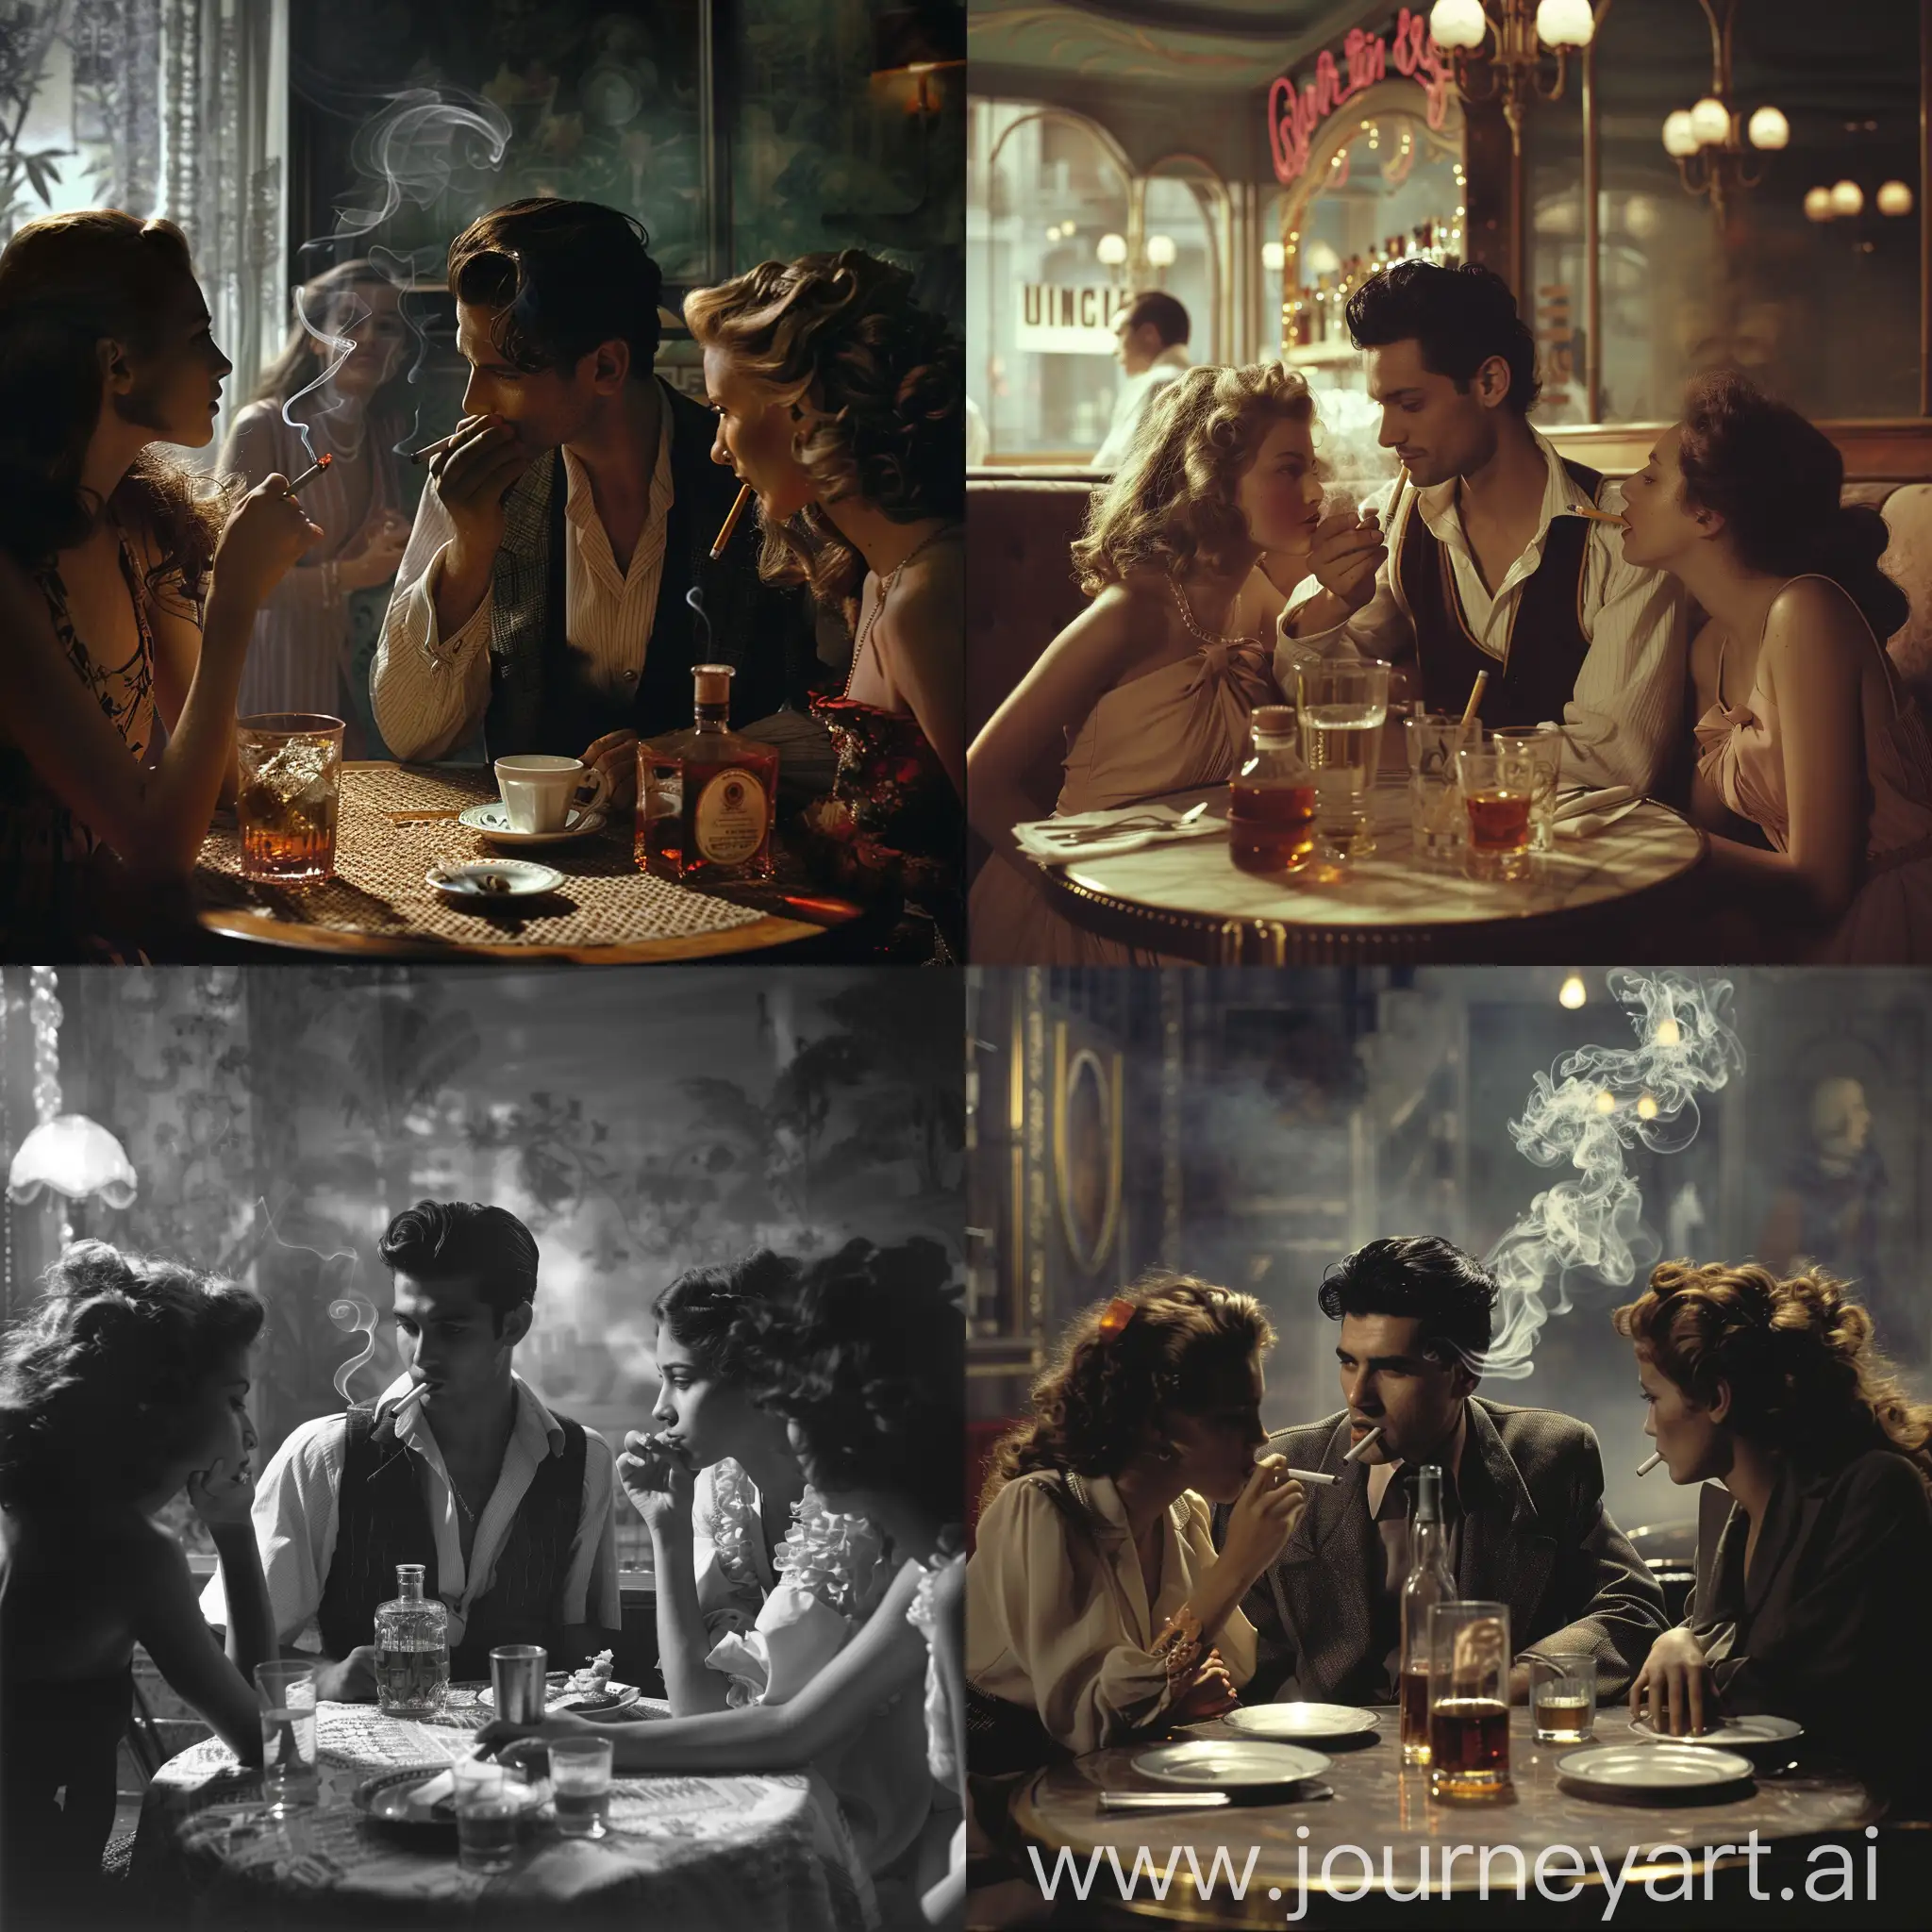 Man-Smoking-with-Two-Girls-in-Classic-Caf-Scene-with-Liquor